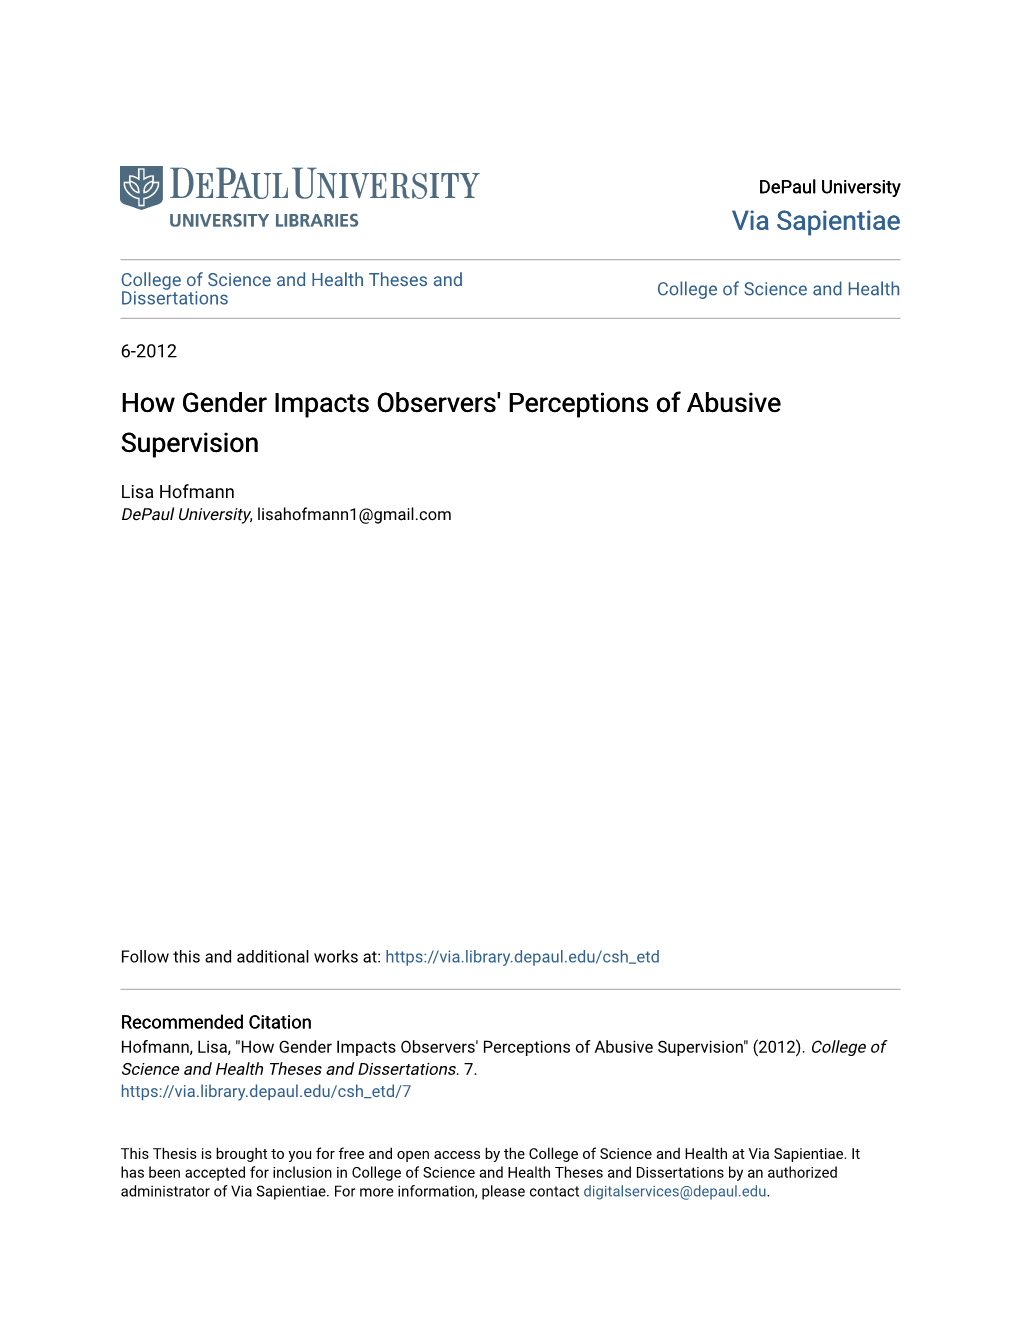 How Gender Impacts Observers' Perceptions of Abusive Supervision